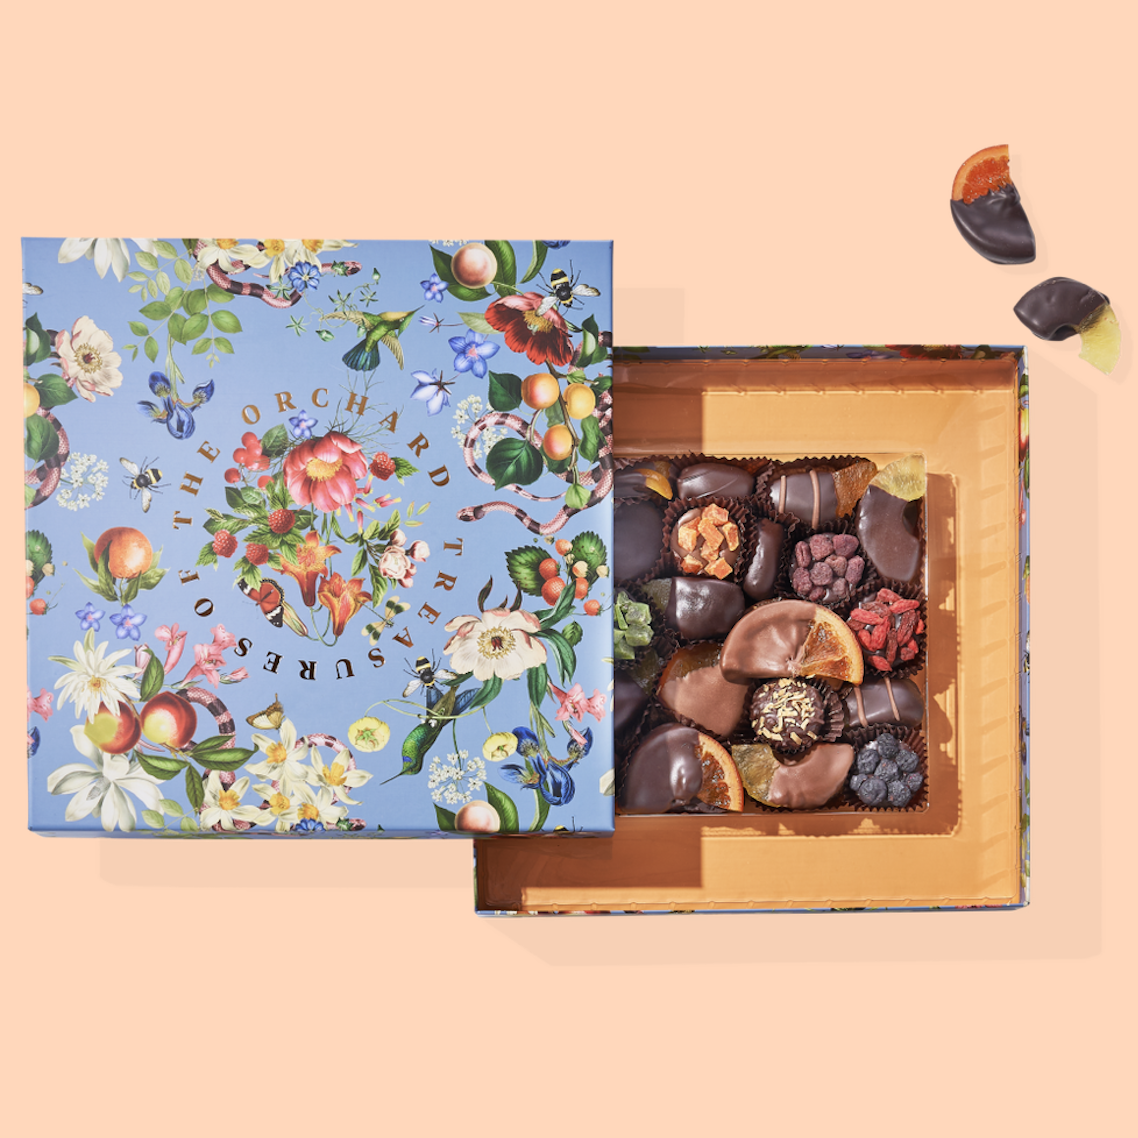 Compartes Treasures of the Orchard Chocolate Gift Box